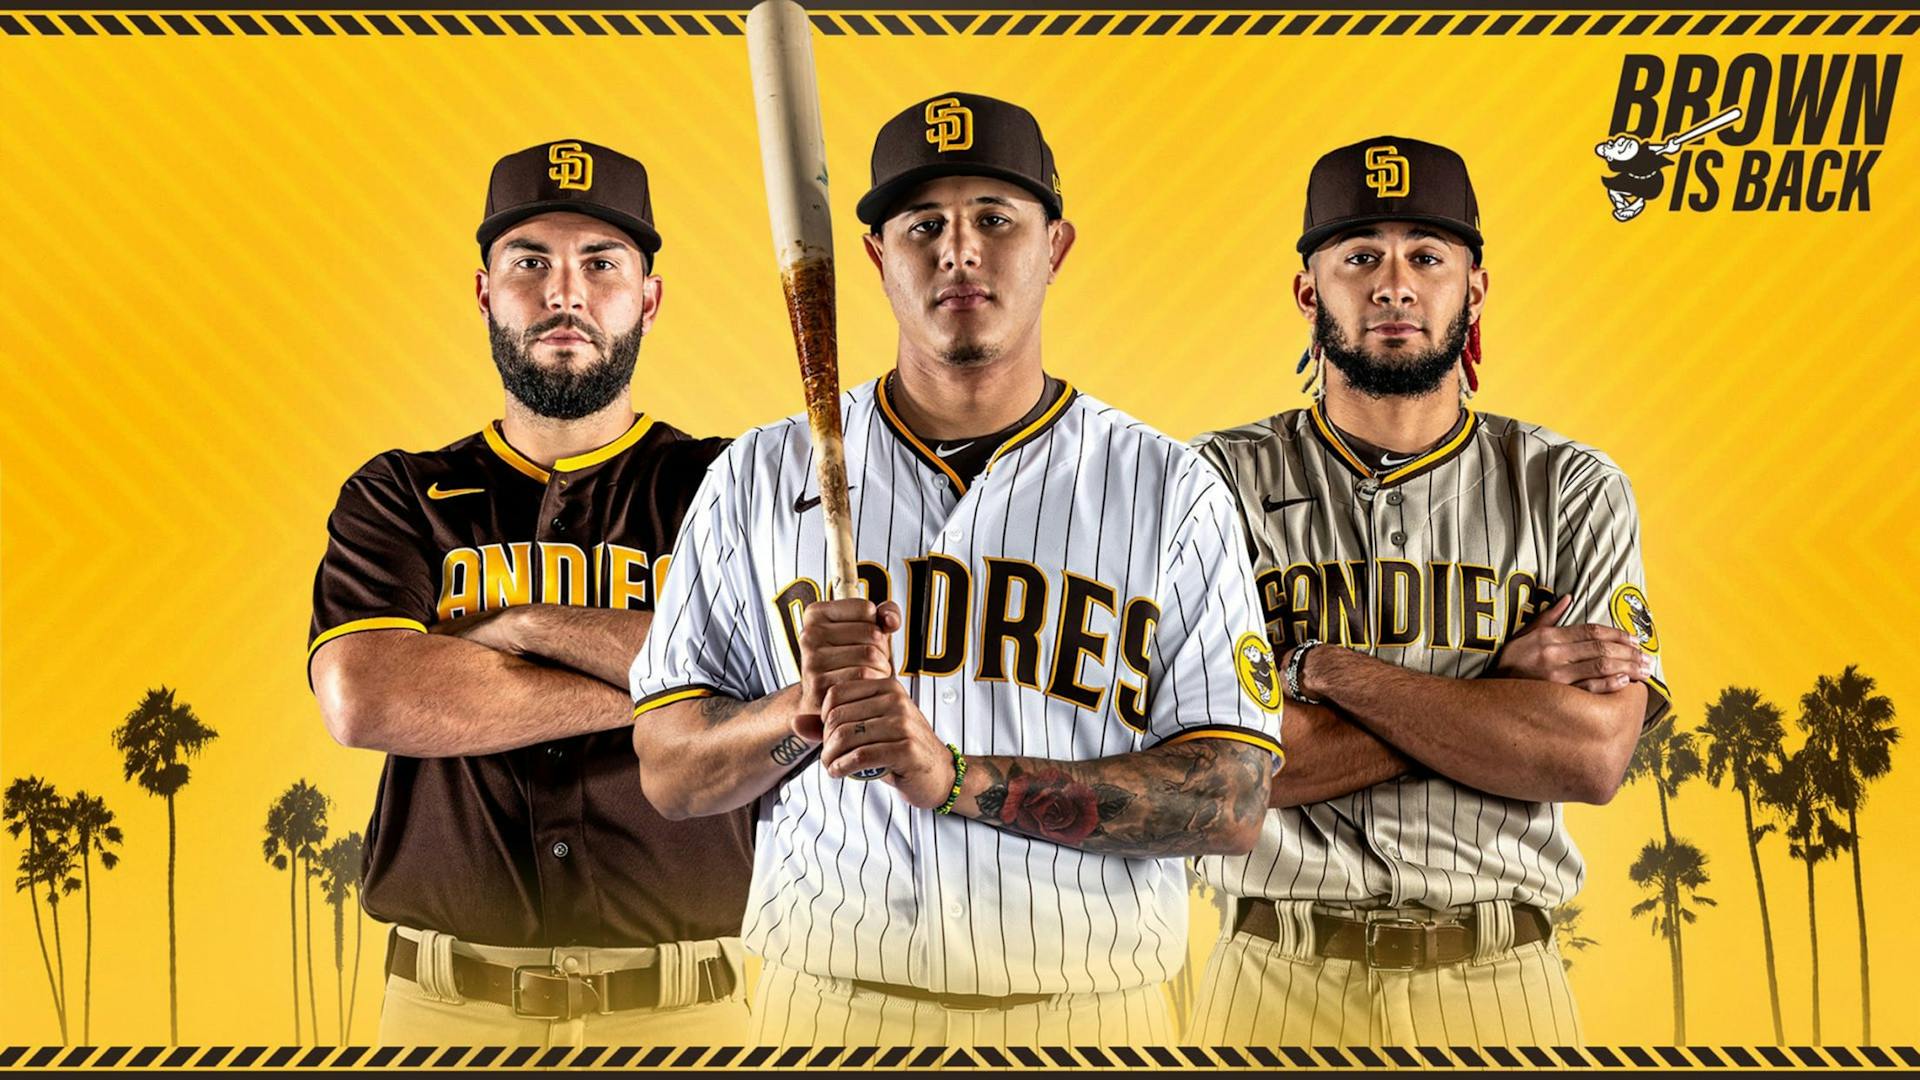 The Padres change uniforms, again, so let's look at their visual